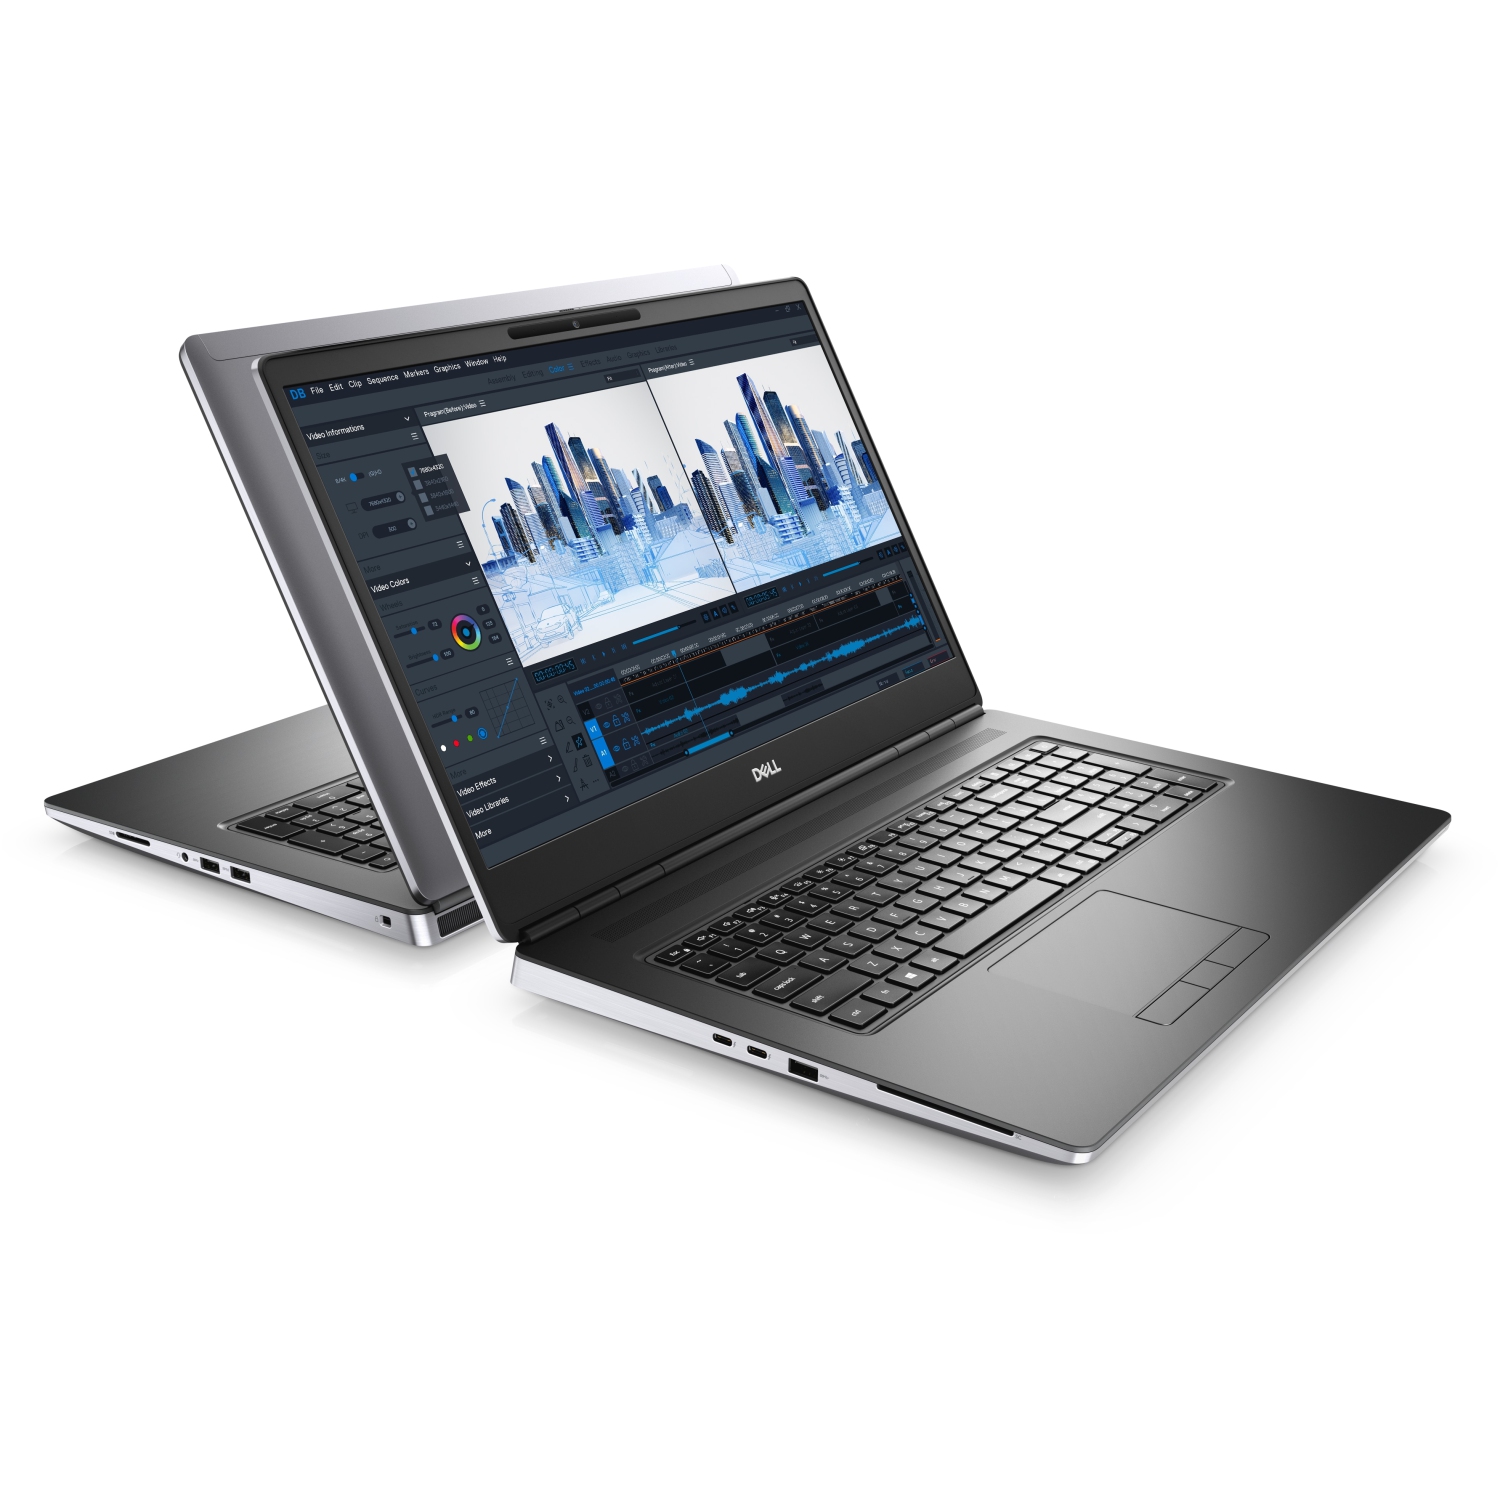 Refurbished (Excellent) - Dell Precision 7000 7760 Workstation Laptop (2021), 17.3" FHD, Core i7, 512GB SSD, 16GB RAM, RTX A4000, 4.8 GHz, 11th Gen CPU Certified